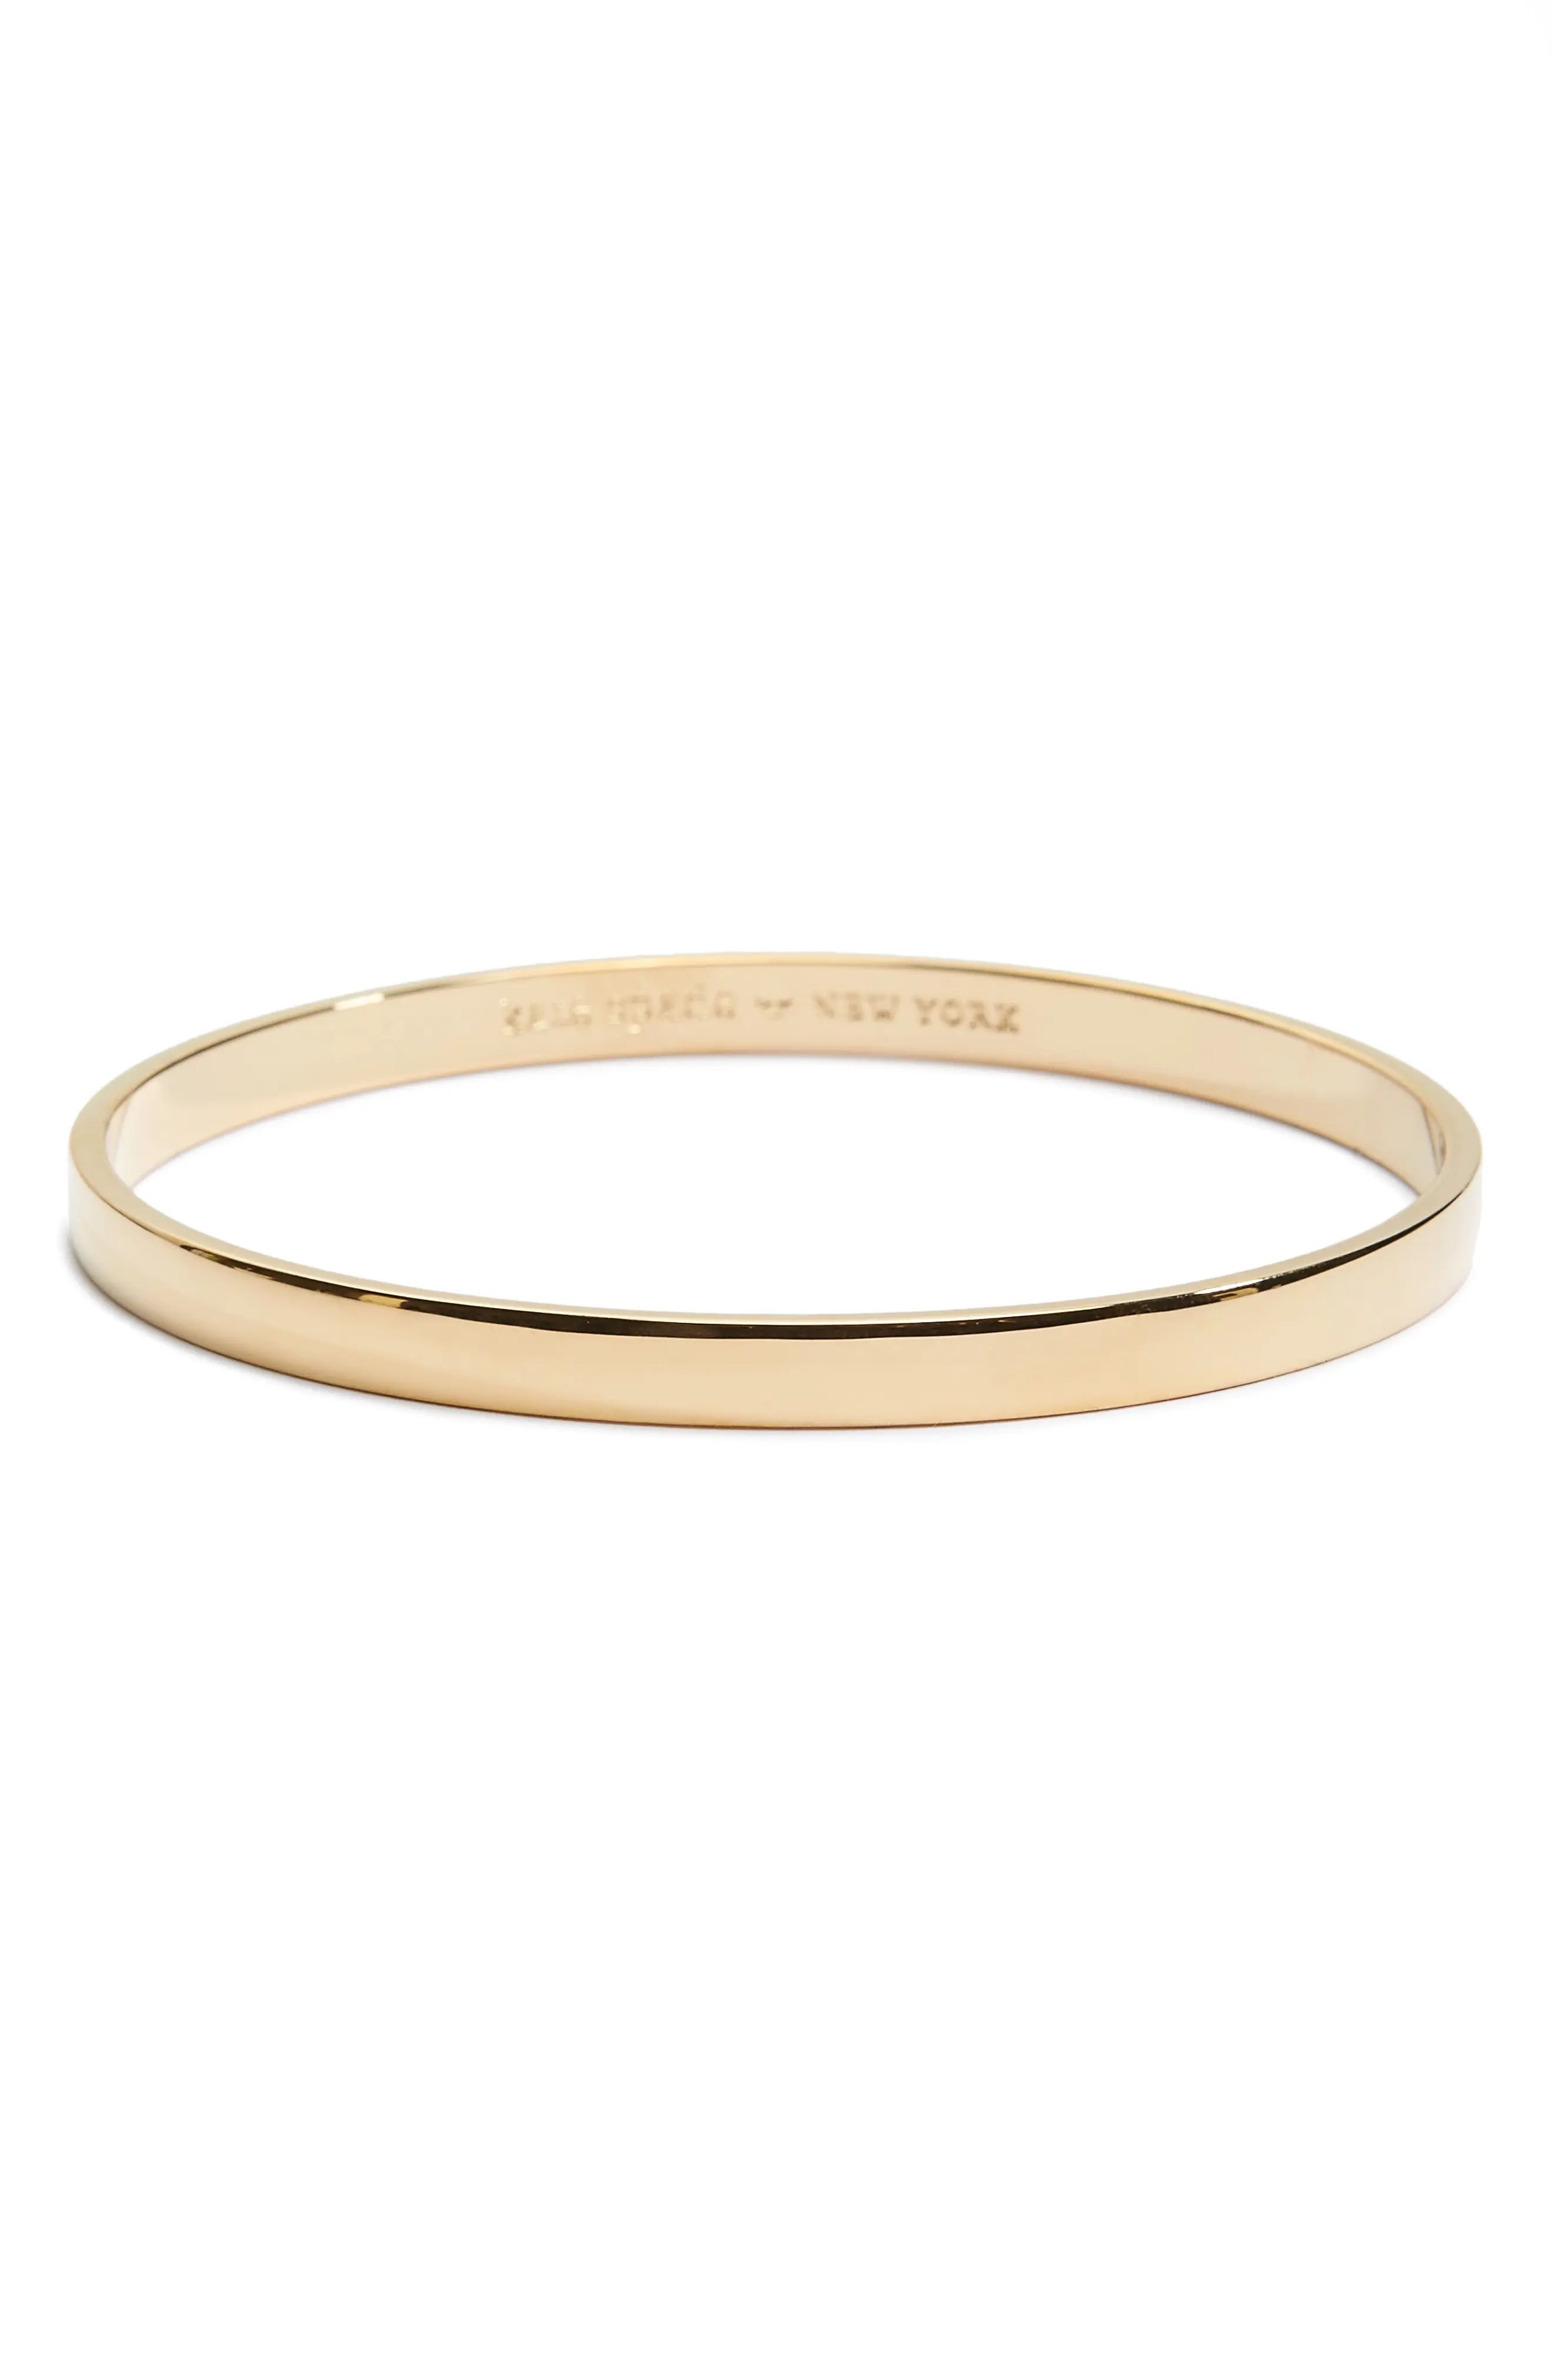 kate spade new york idiom - heart of gold bangle at Nordstrom | Nordstrom